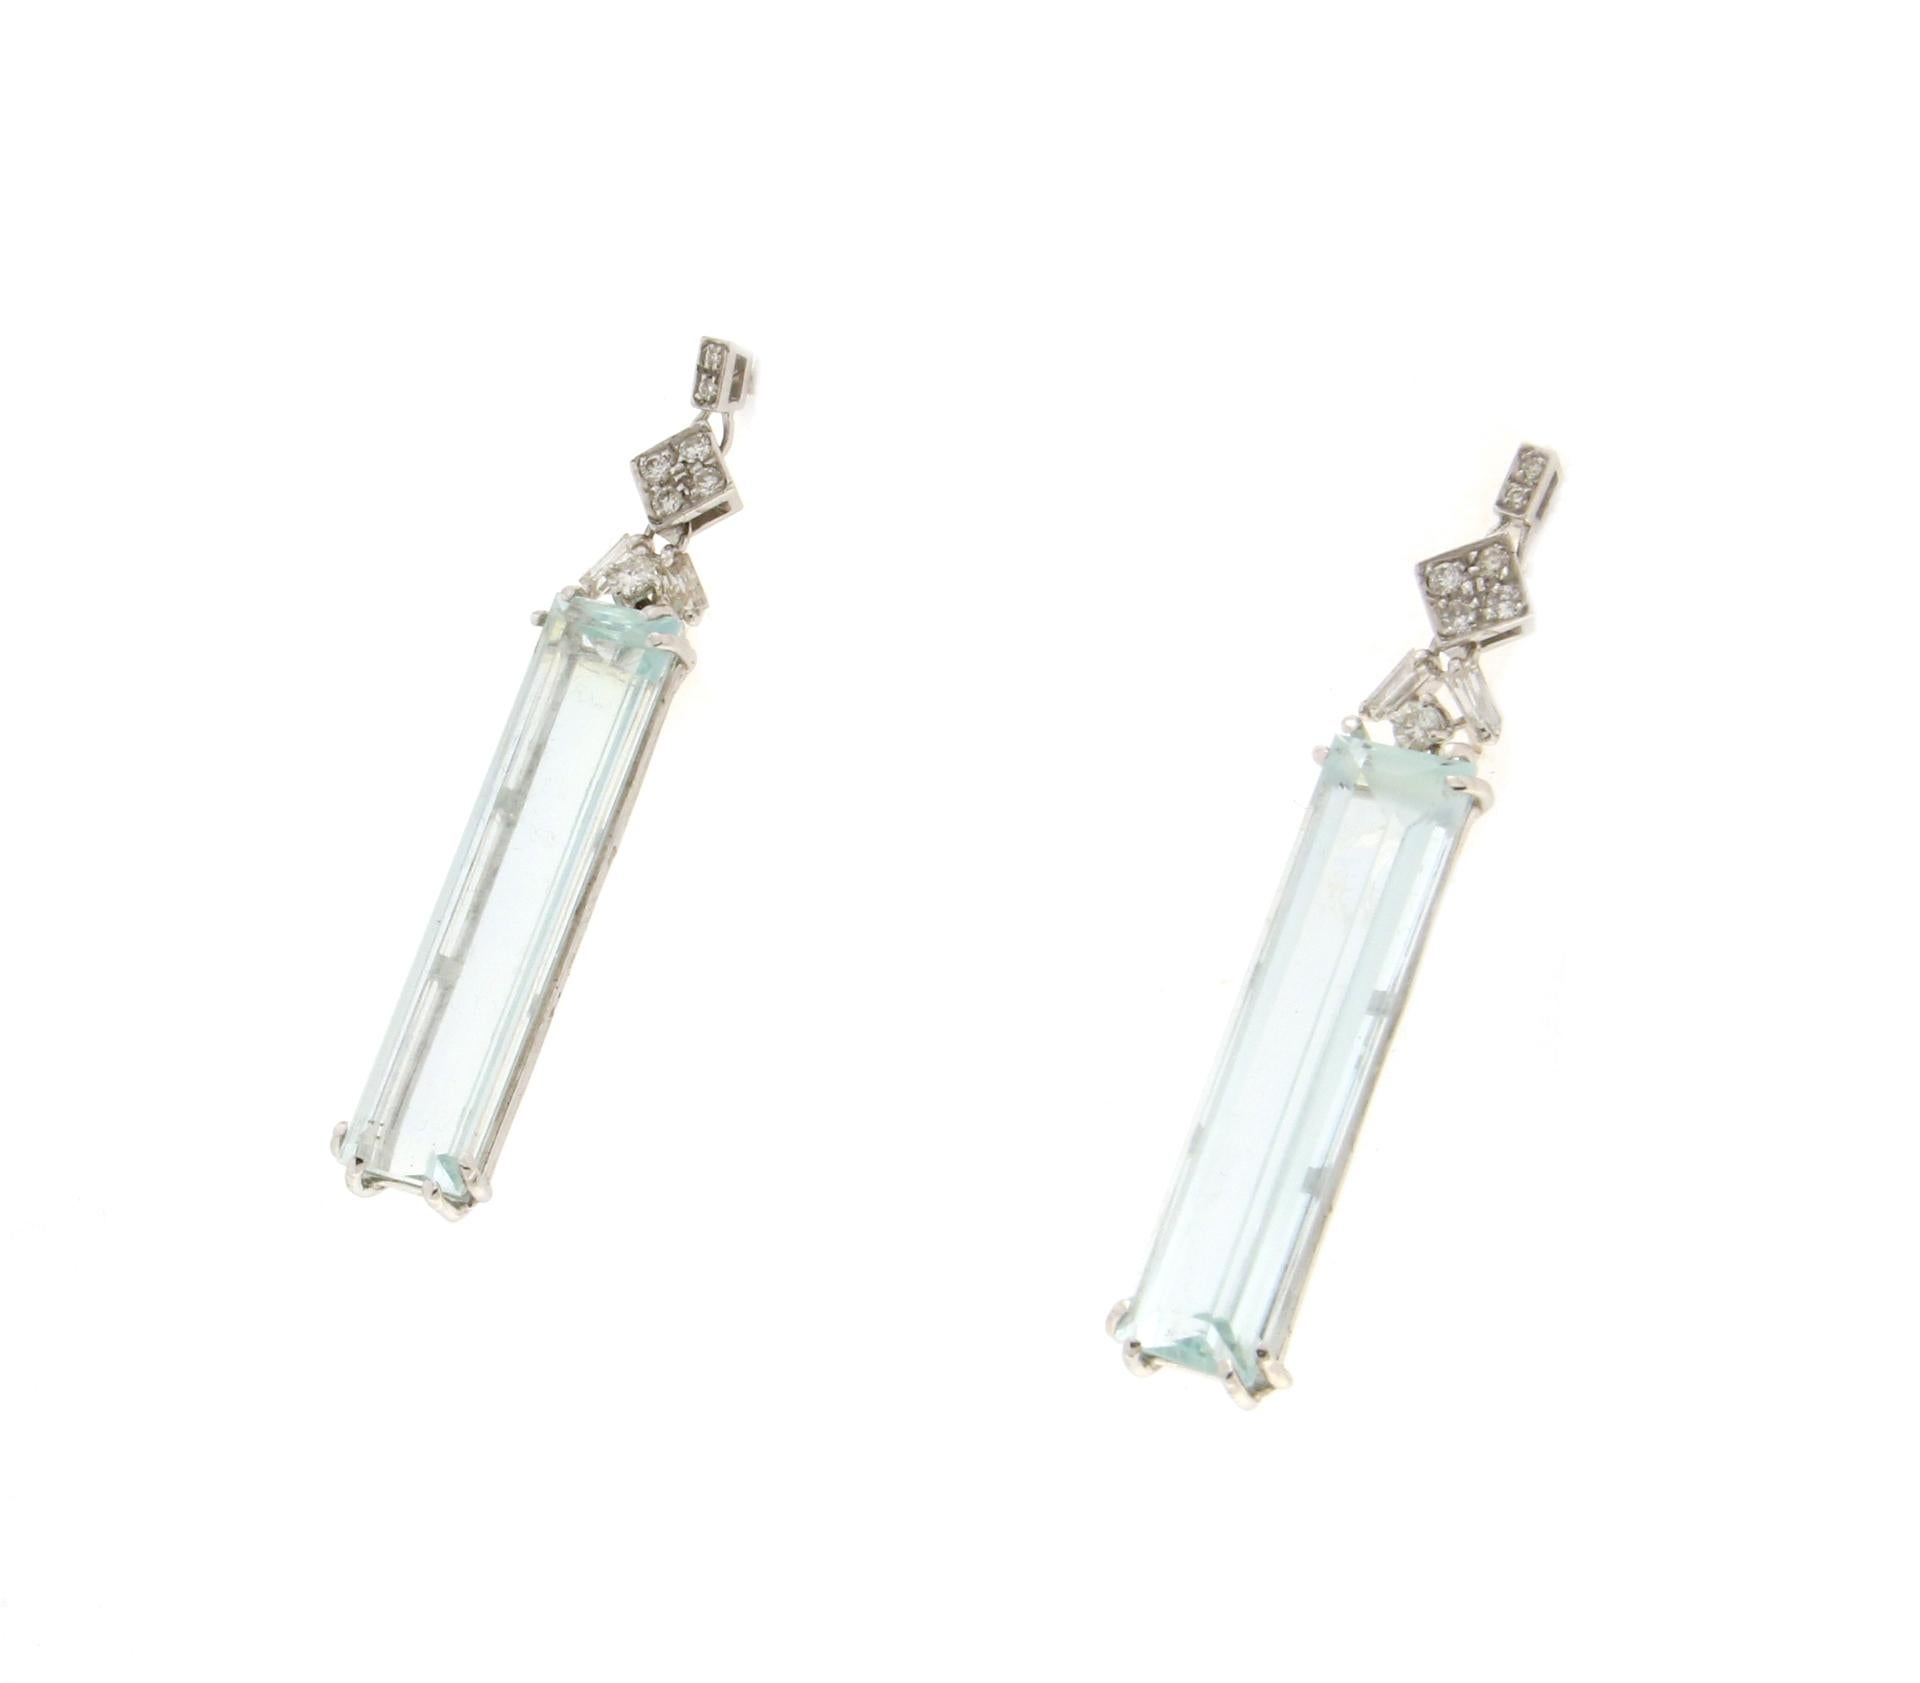 18 karat white gold drop earrings. Handmade by our artisans assembled with Brazilian aquamarine and diamonds

Earrings total weight 7.50 grams
Aquamarine weight 16.11 Karats
Diamonds weight 0.44 Karats